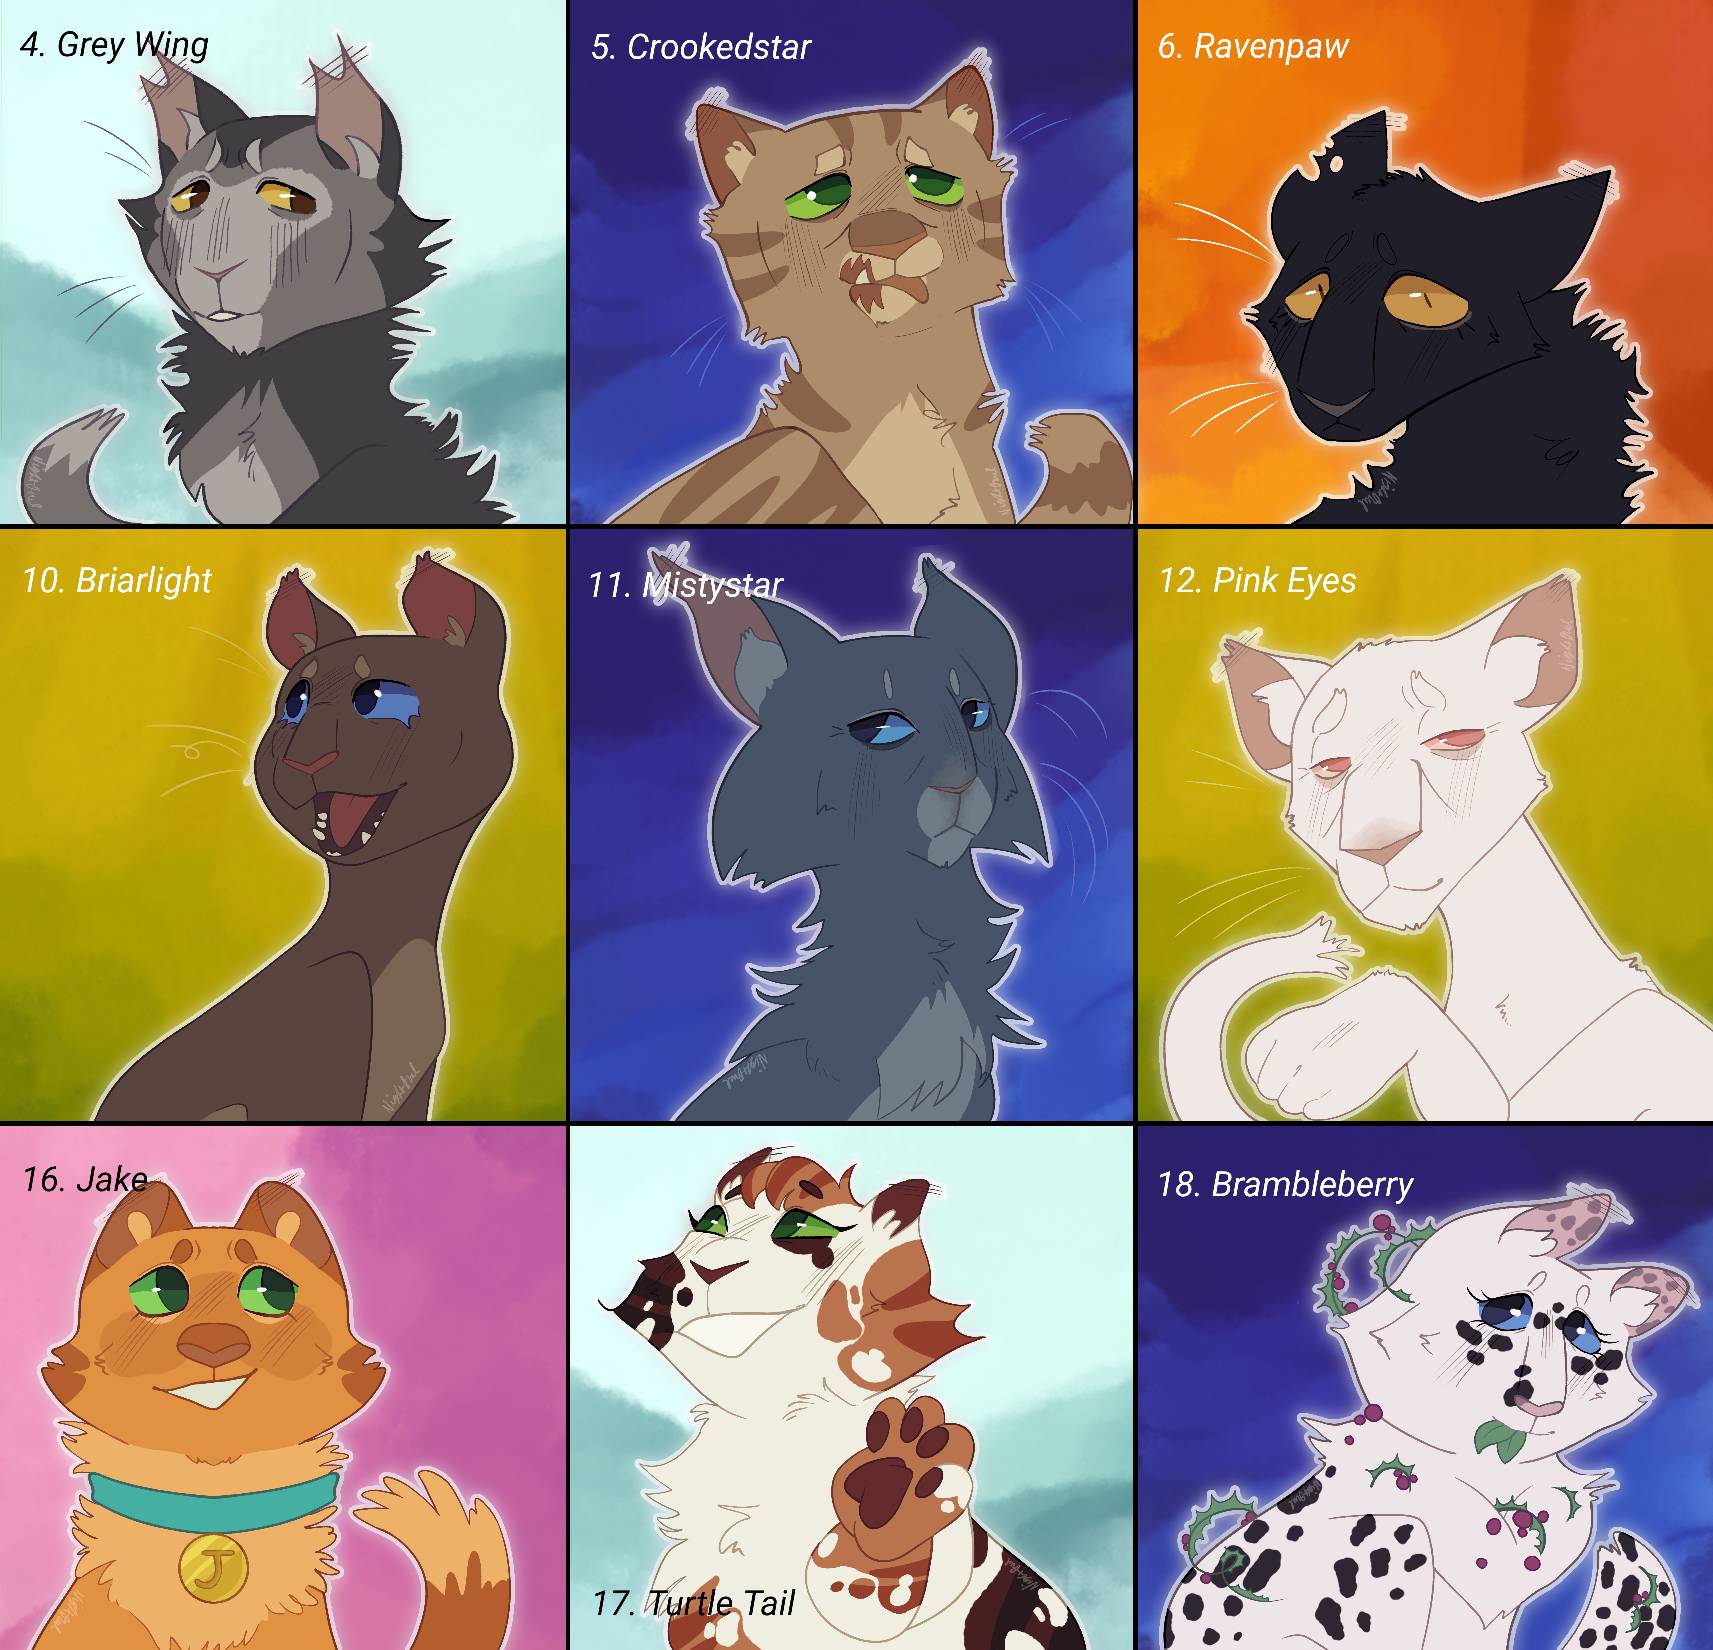 Favourite Warrior Cats characters 2 by OwlThatNestsLow on DeviantArt